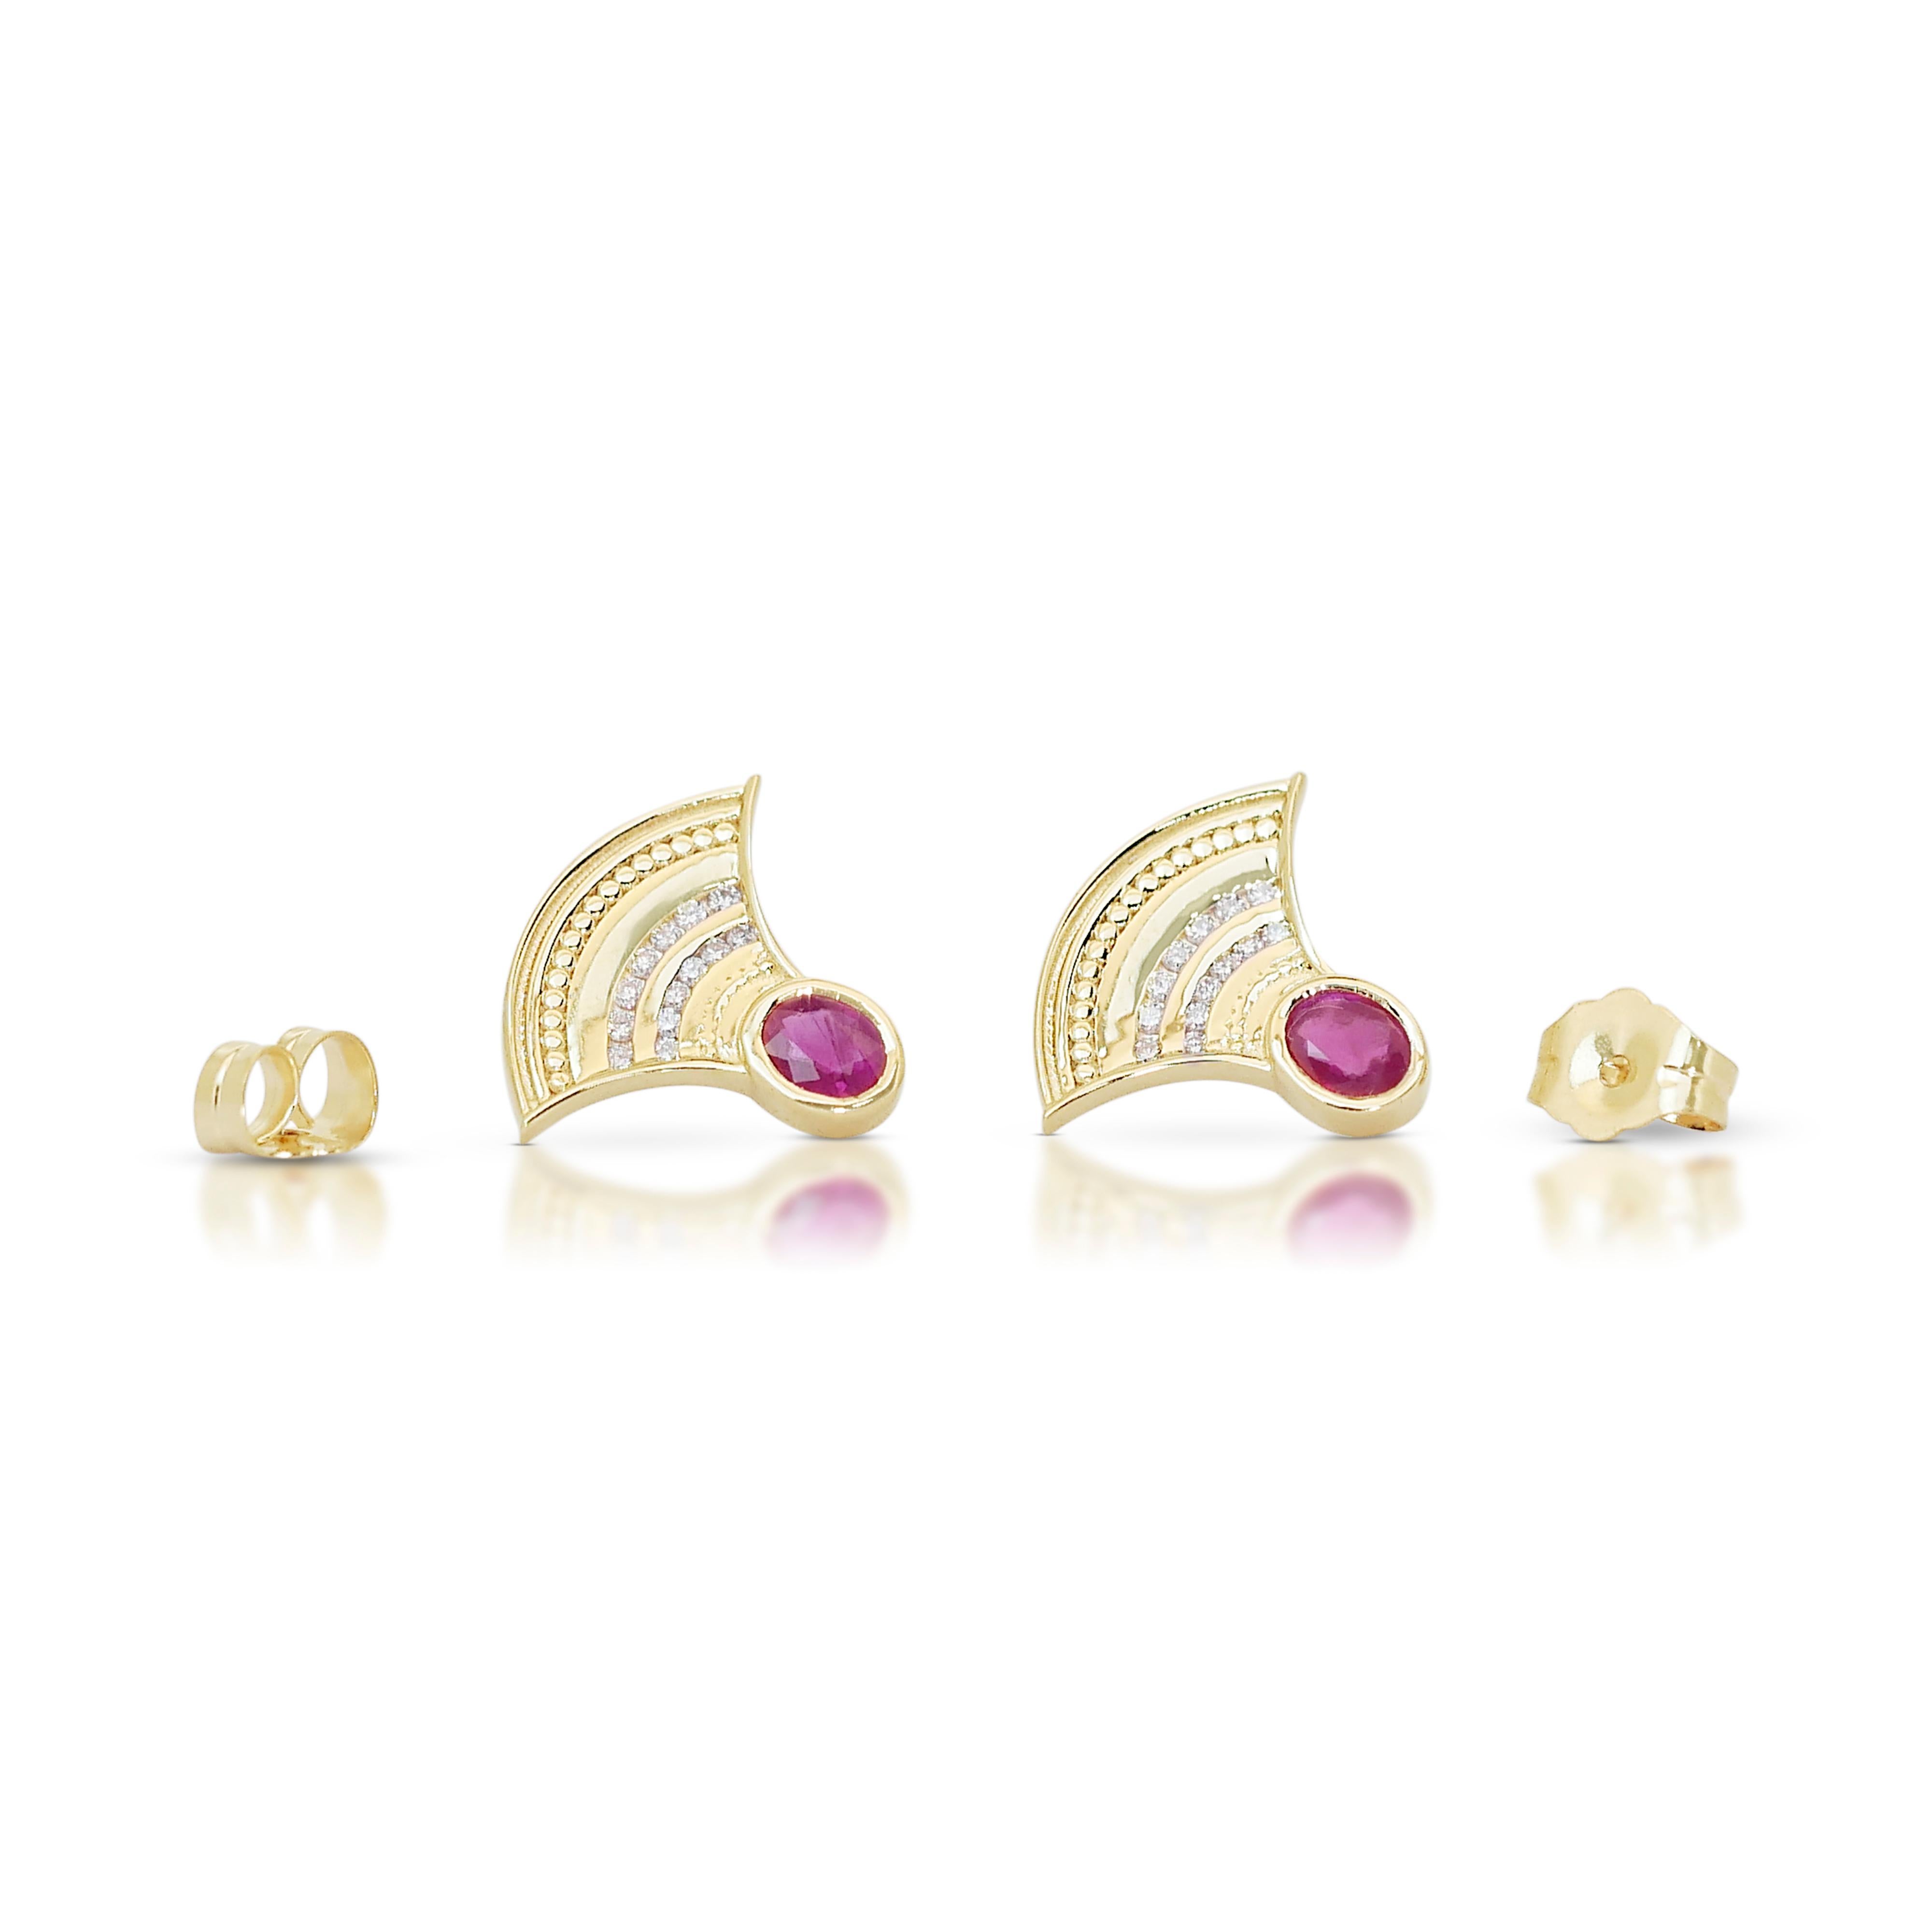 Stunning 0.75ct Rubies and Diamonds Stud Earrings in 14k Yellow Gold - AIG  For Sale 3